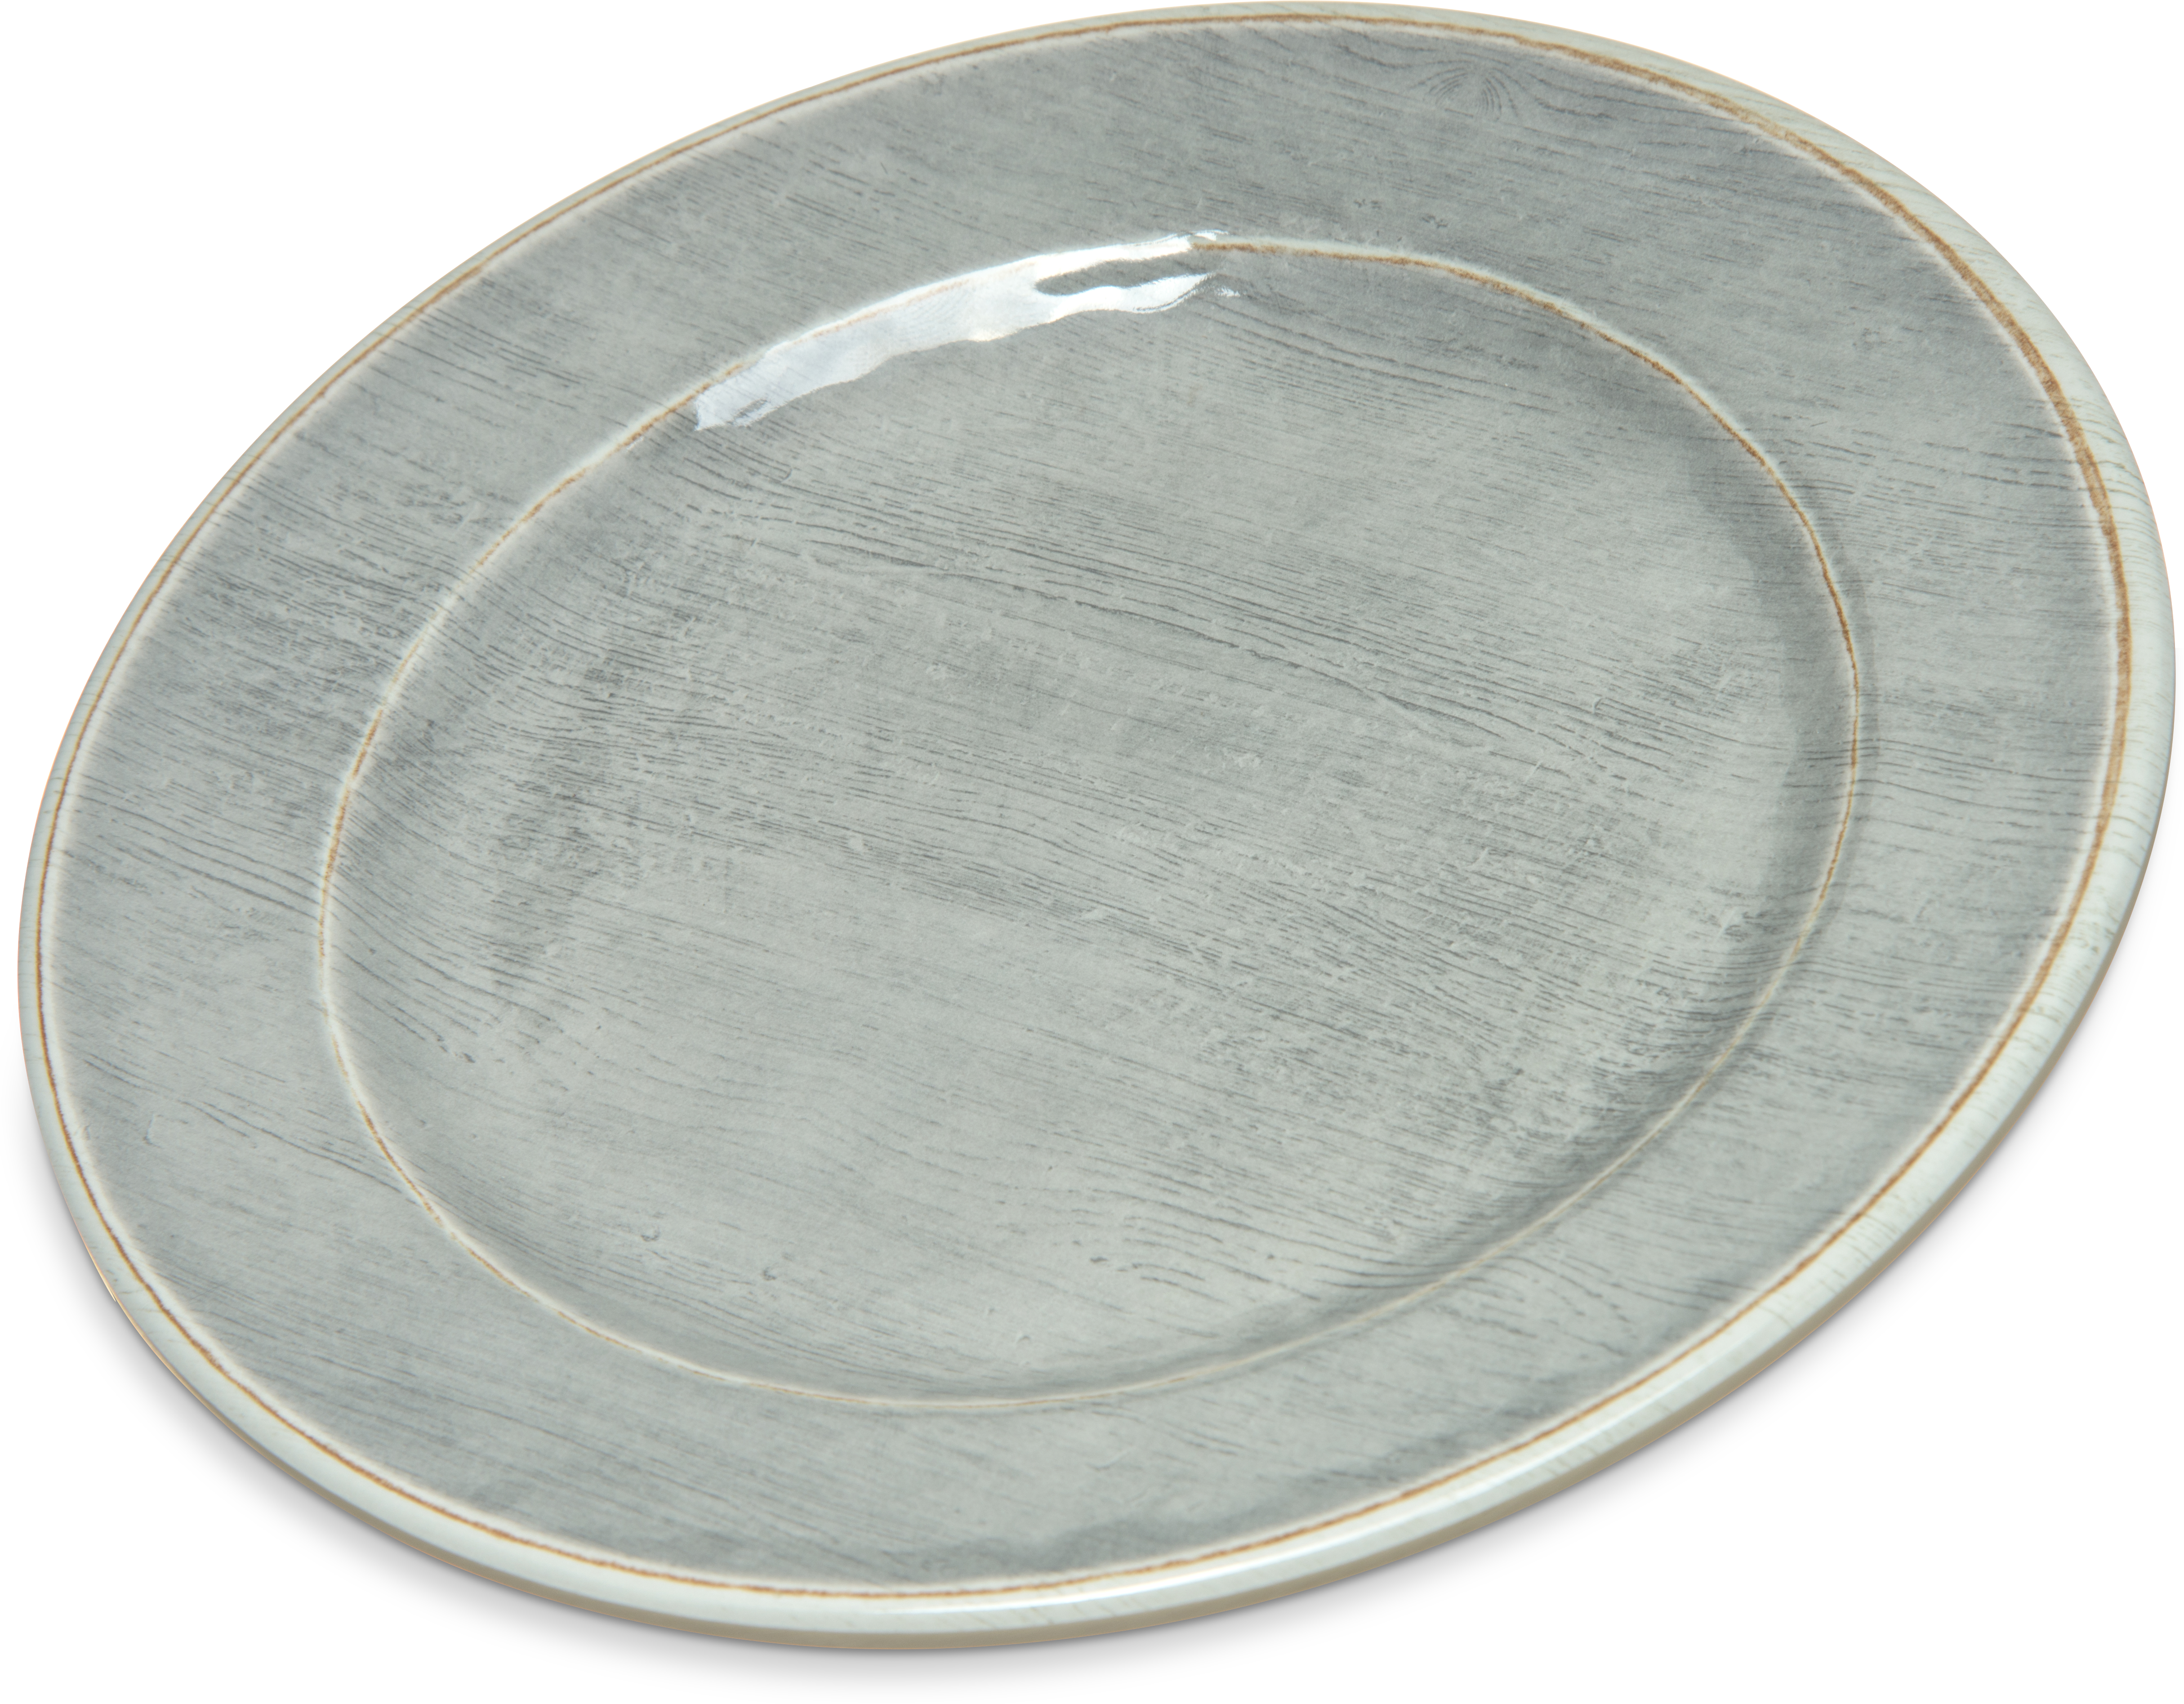 Grove Melamine Bread And Butter Plate 7 - Smoke